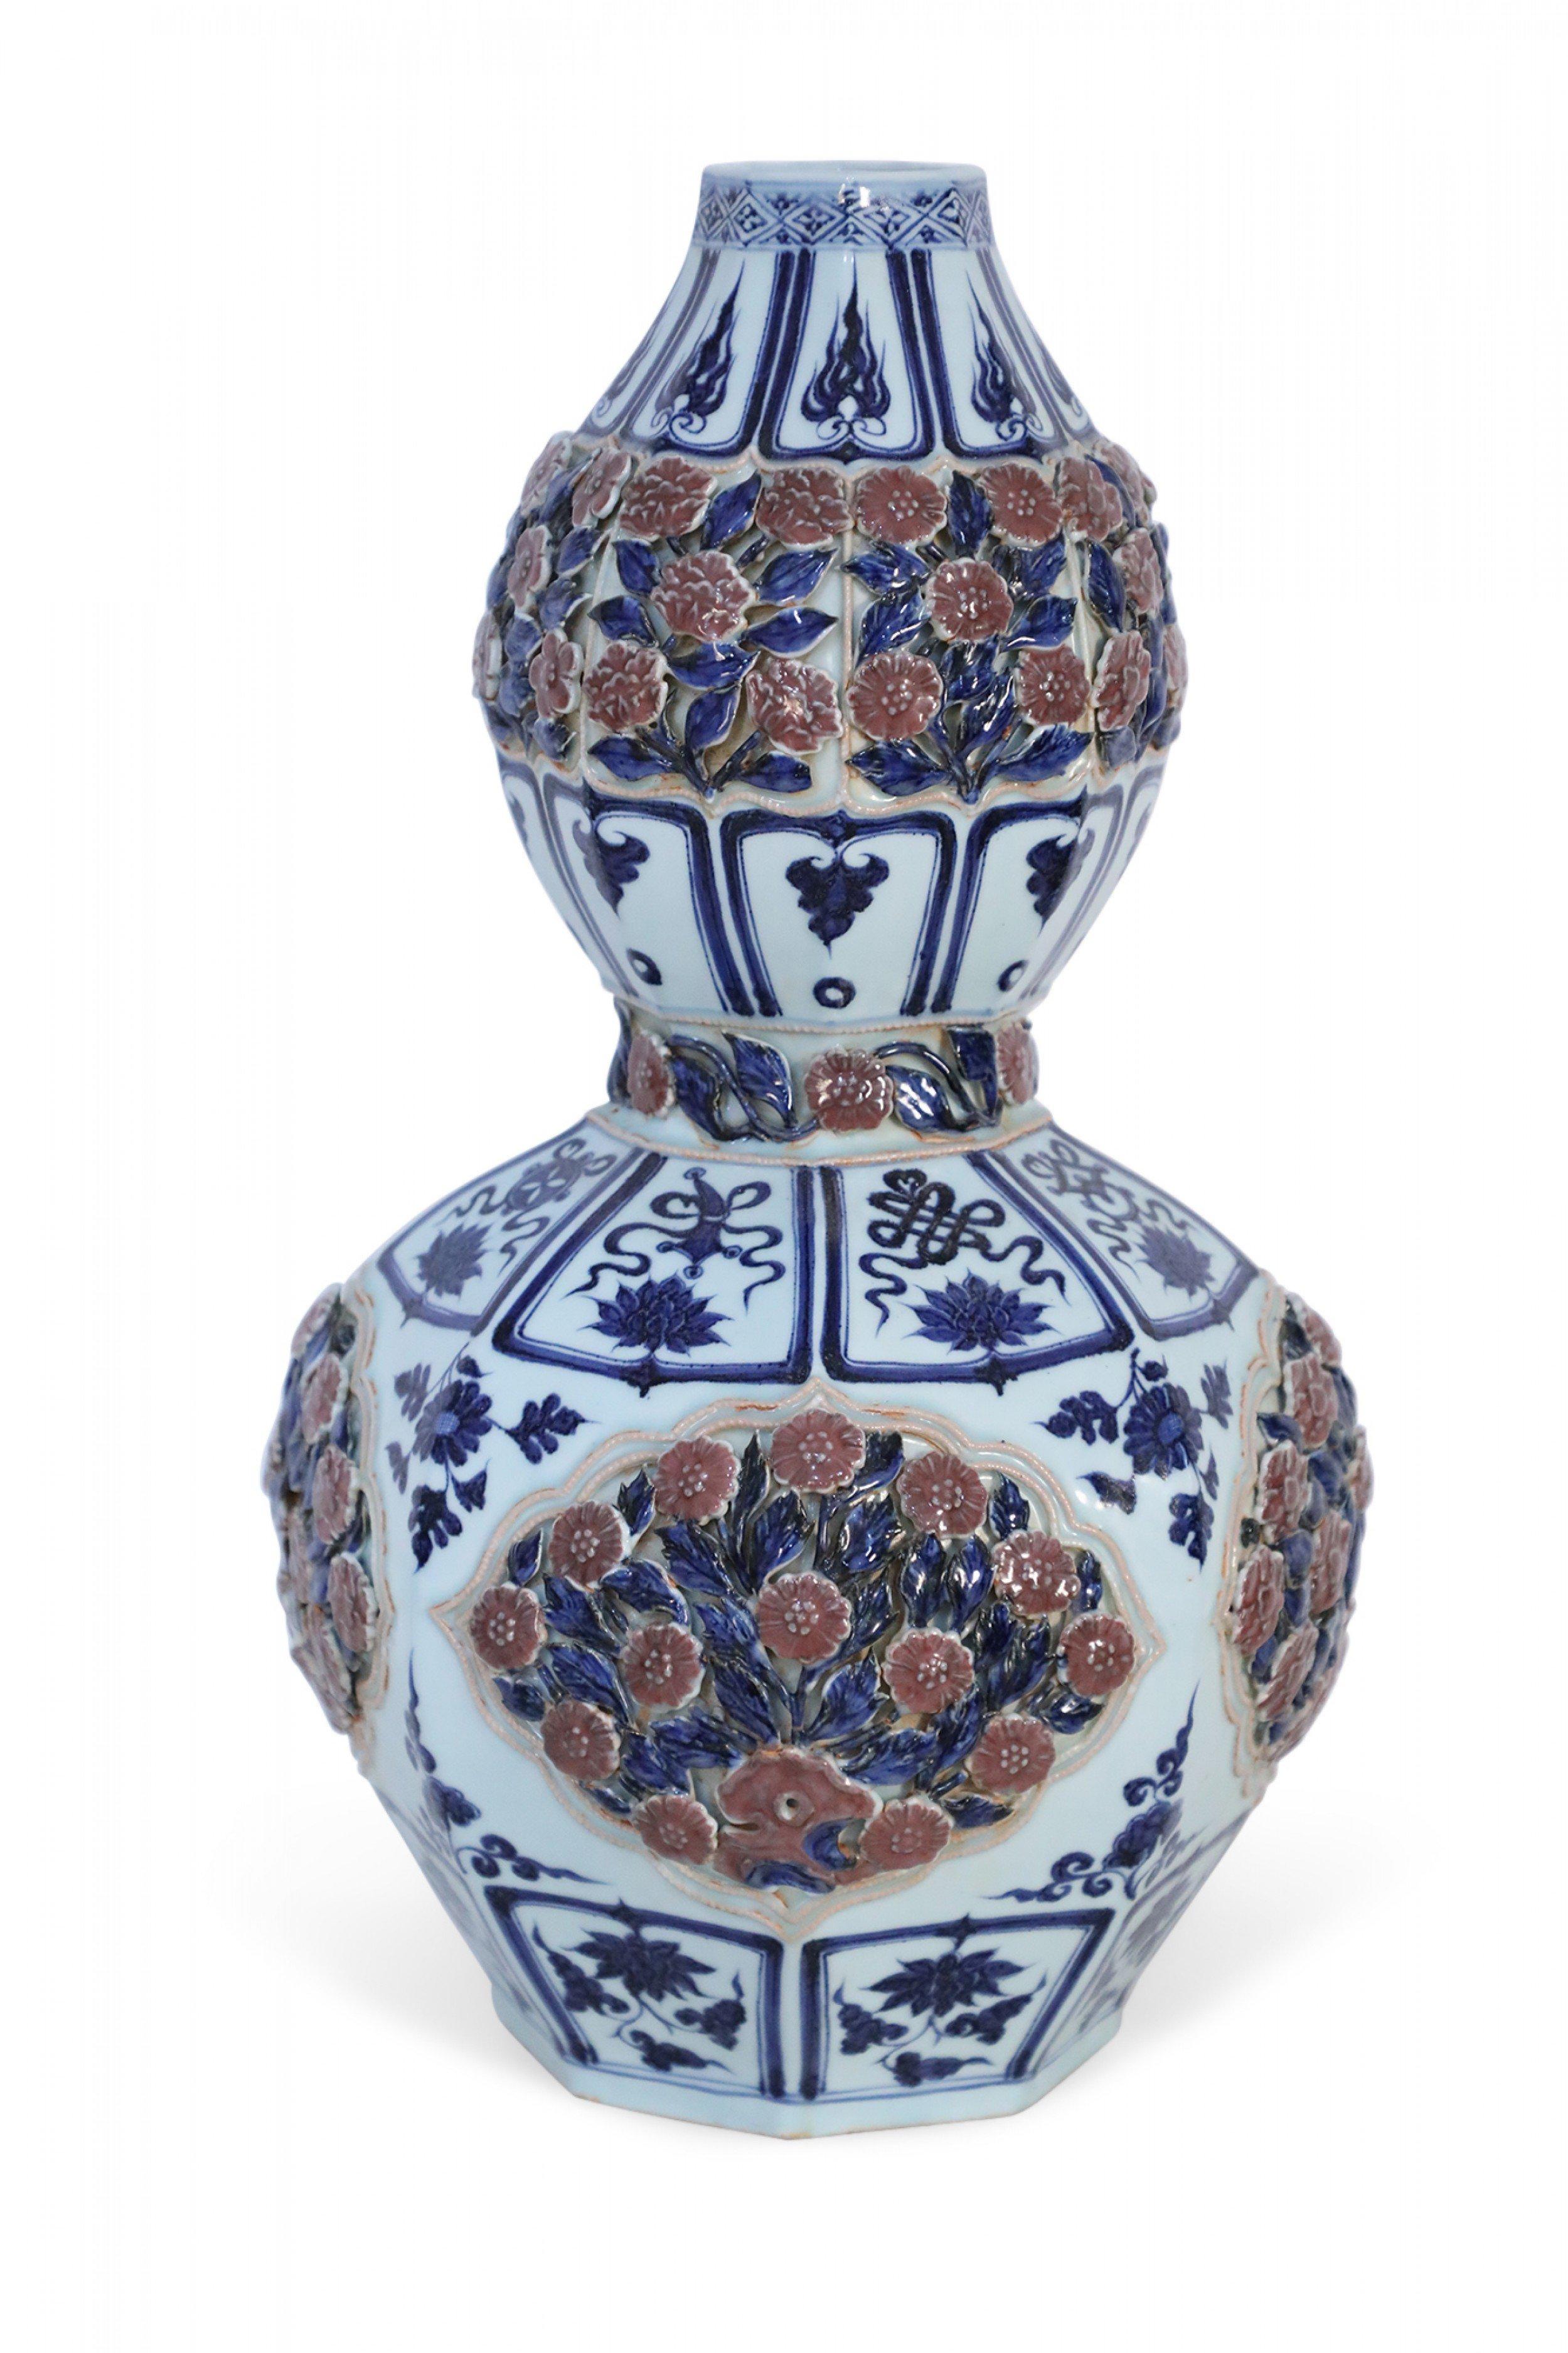 20th Century Chinese White and Blue and Raised Rose Design Double Gourd Porcelain Vase